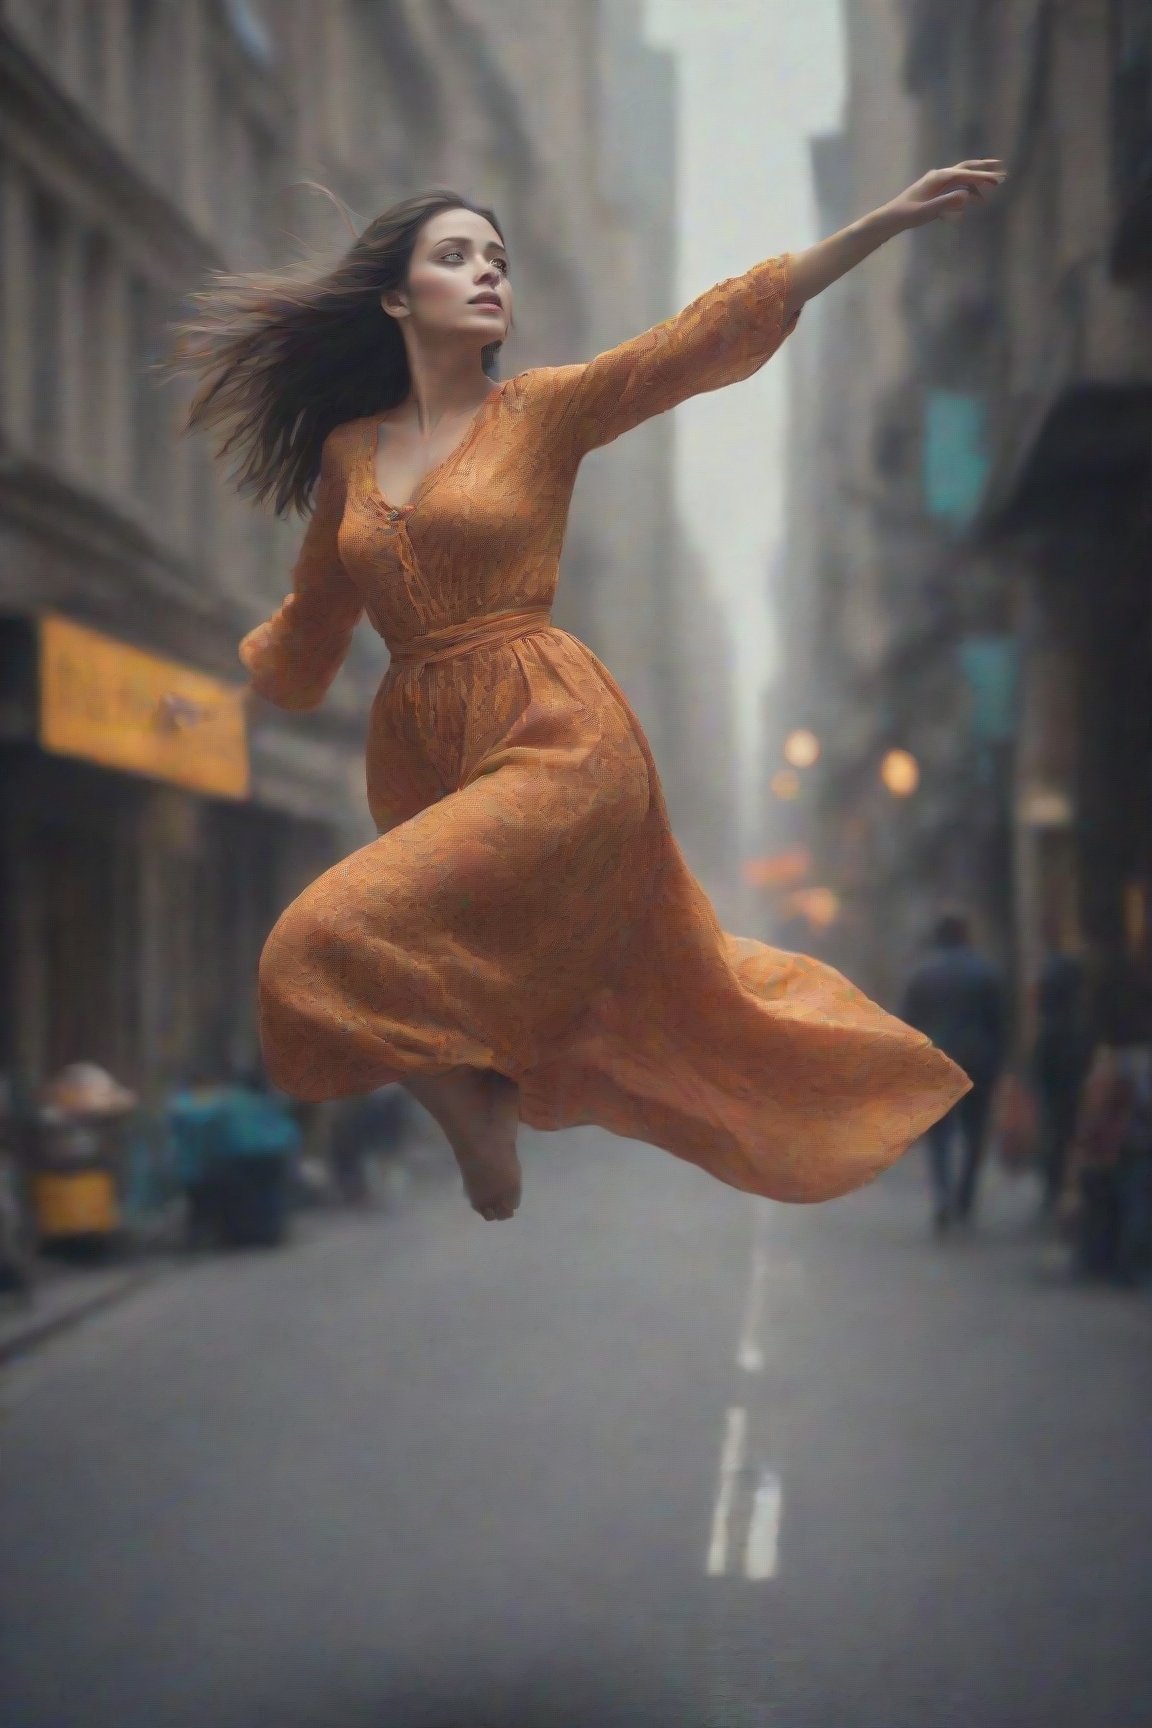 Generate hyper realistic image of a woman as she levitates on the bustling streets of a vibrant city, her vibrant attire and confident stride captivating the attention of passersby, her eyes holding a thousand stories waiting to be told. She is lucid dreaming.